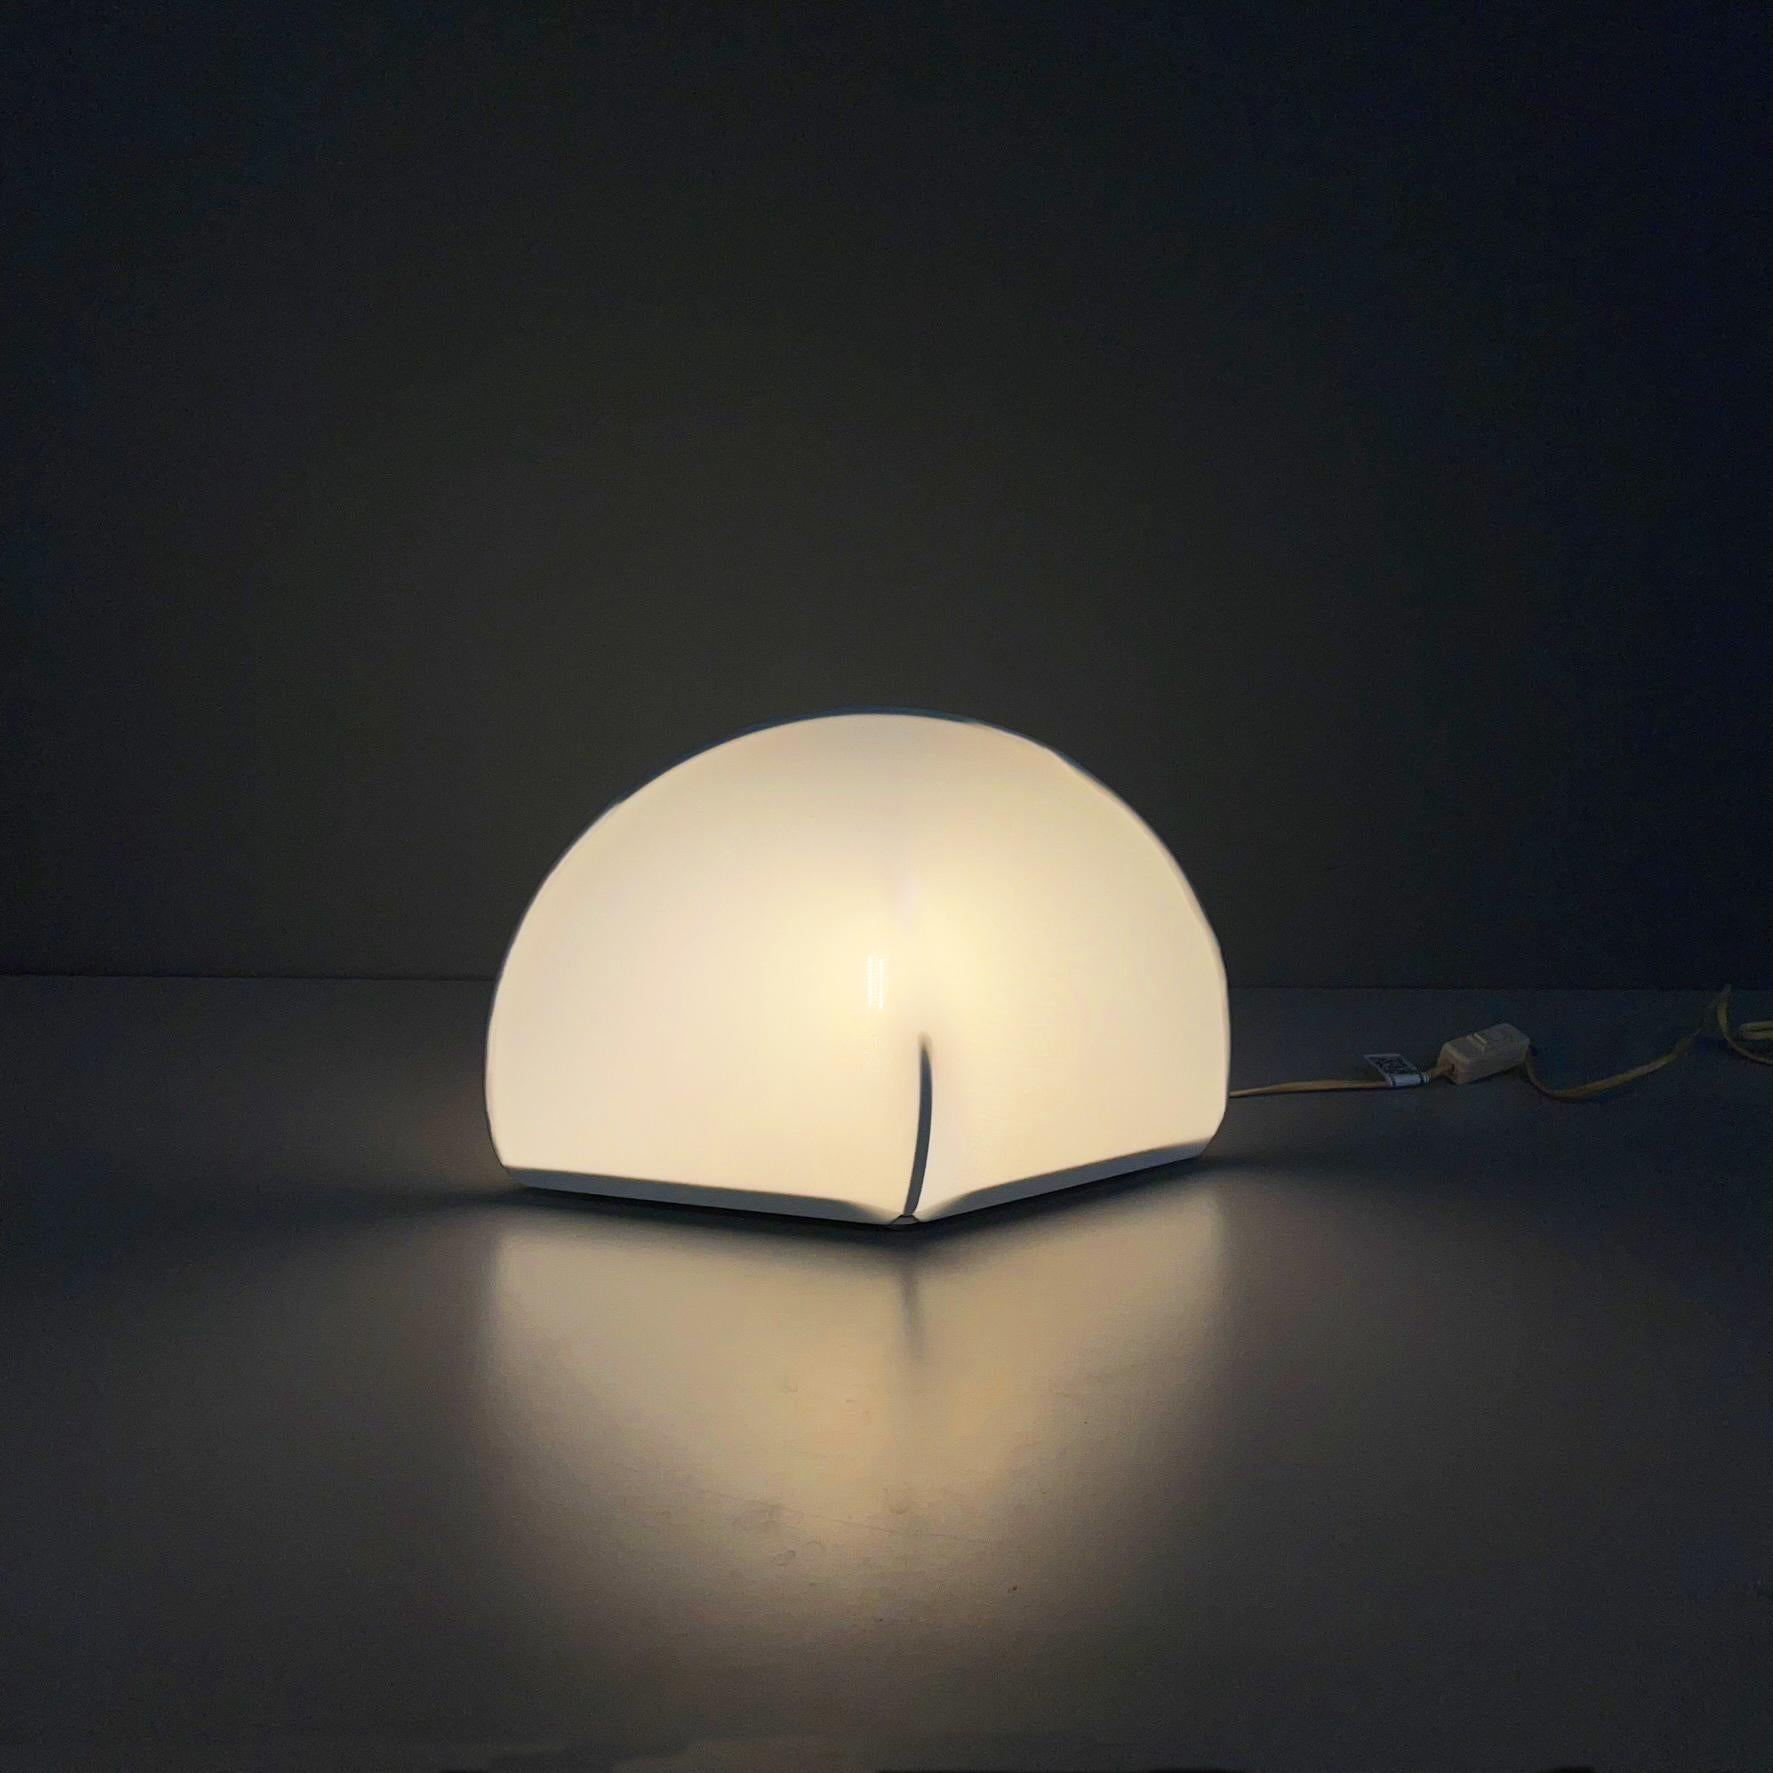 Italian modern Table lamp mod. Kaori 2 by Kazuhide Takahama for Sirrah, 1970s.
Table or bedside lamp mod. Kaori 2 with rhomboidal base in white metal. The structure is composed of a metal arch. The lampshade is made of white stretch jersey fabric,